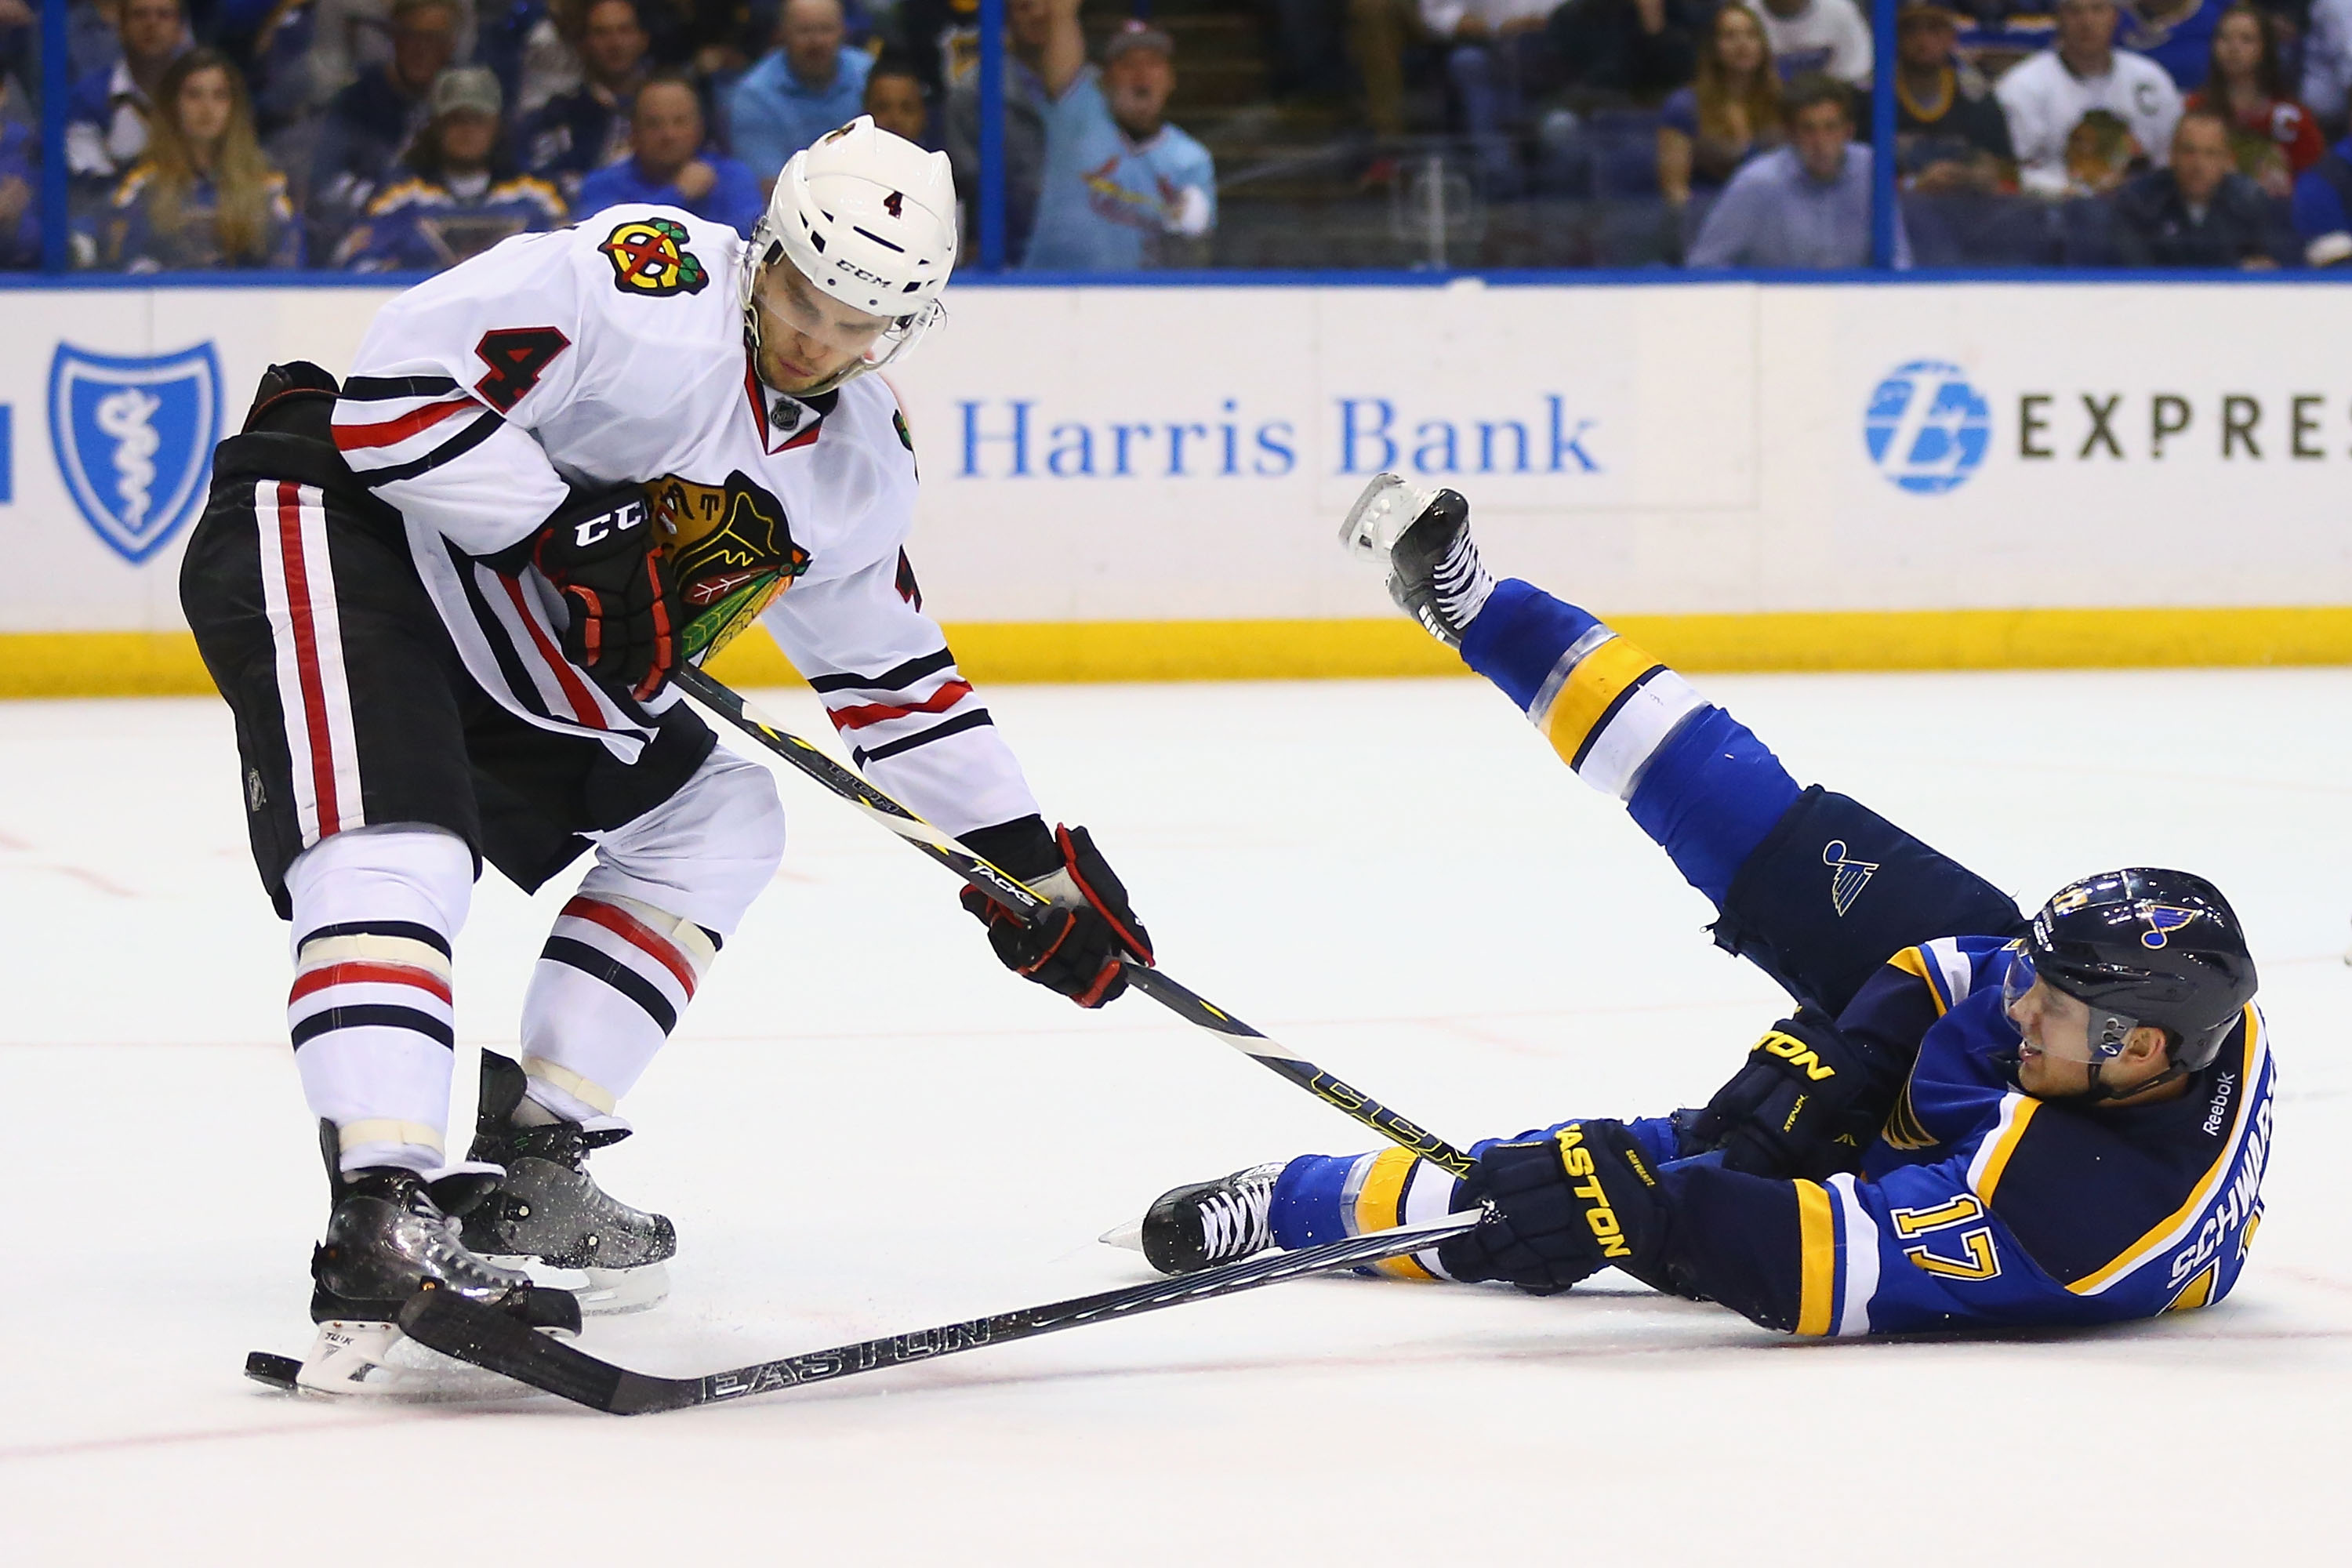 Blackhawks vs. Blues Live Stream How to Watch Game 3 Online